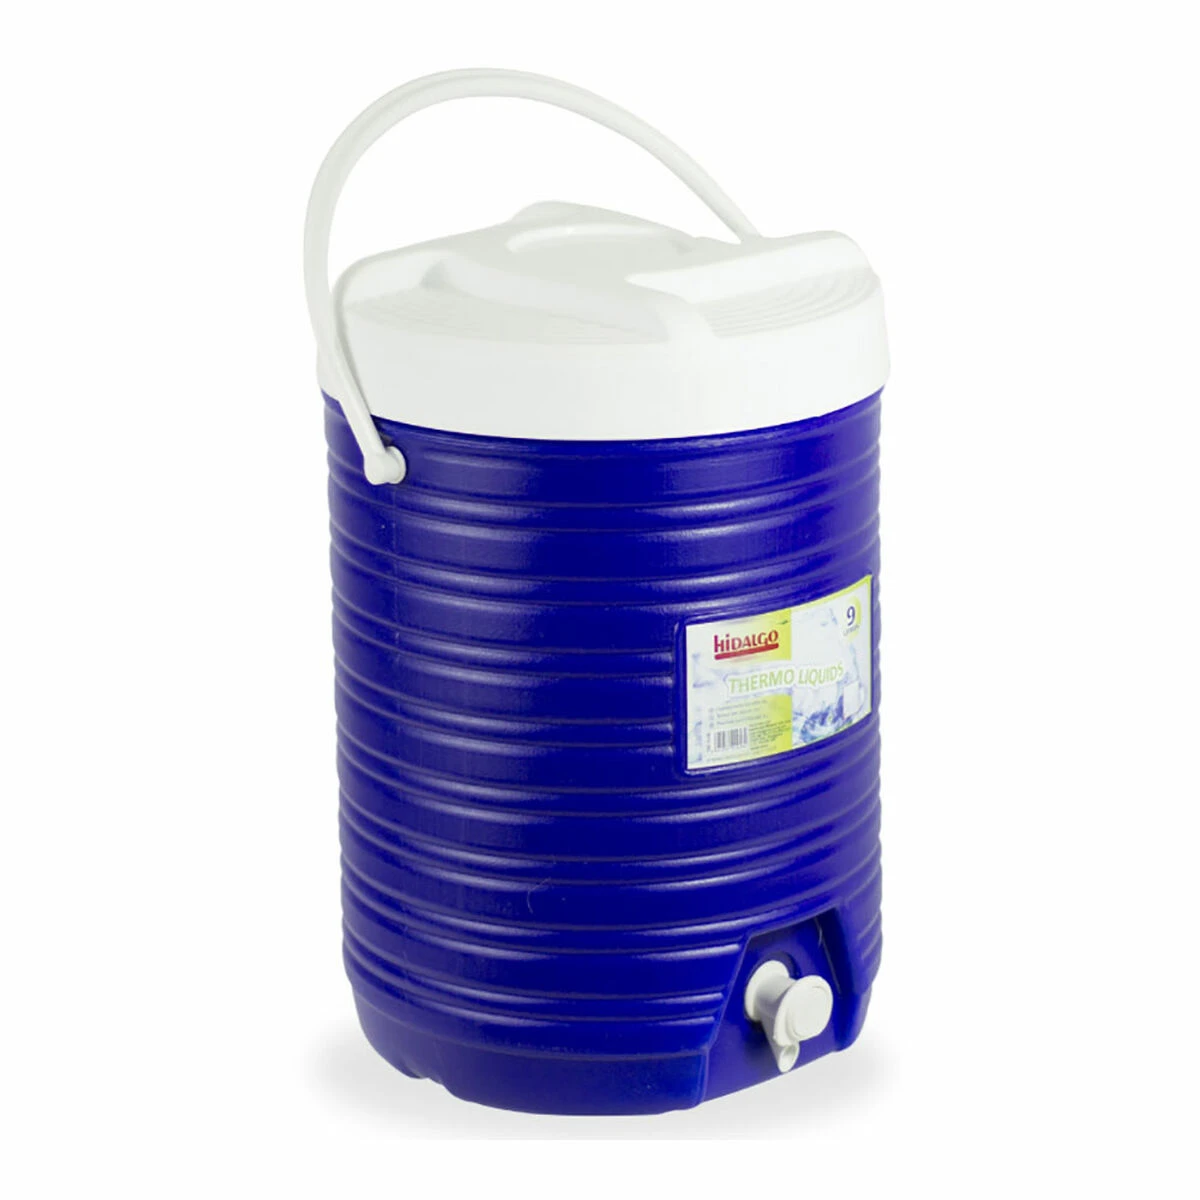 Blue cooler with tap and white handle